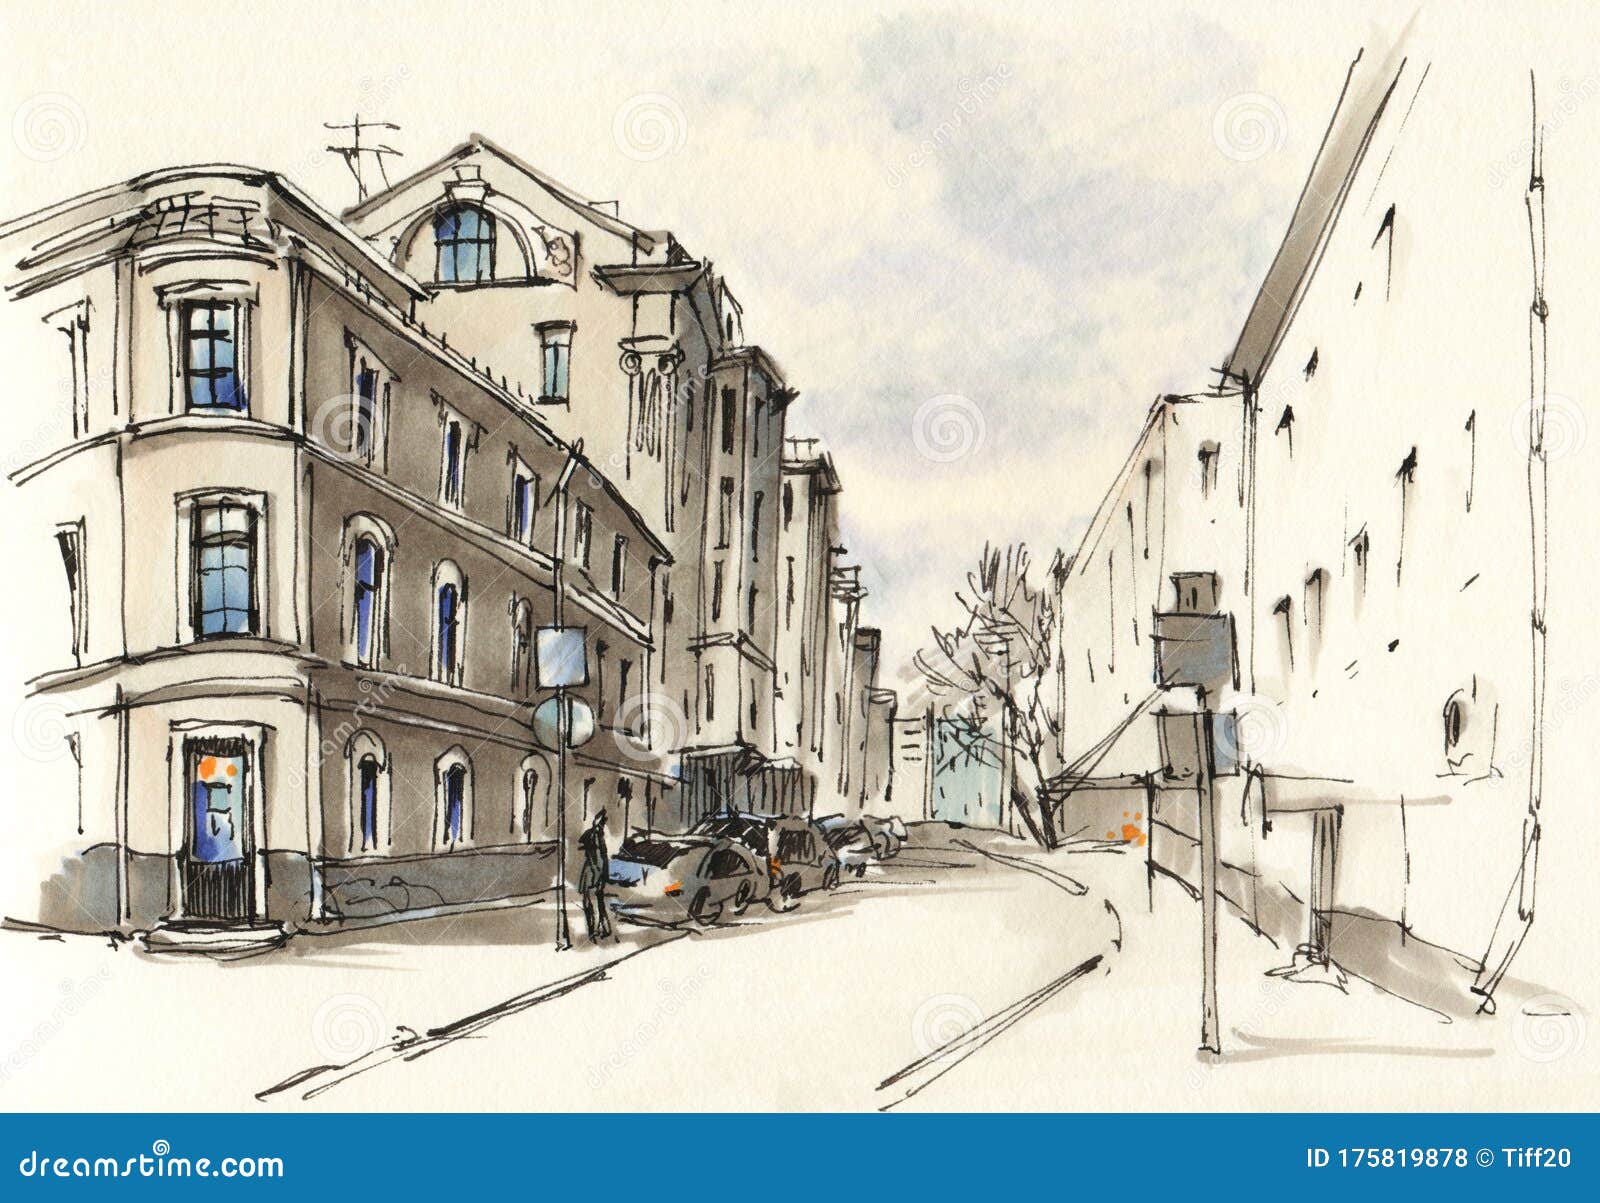 Retro city sketch street buildings and old cars vector illustration  pencil on paper style  CanStock